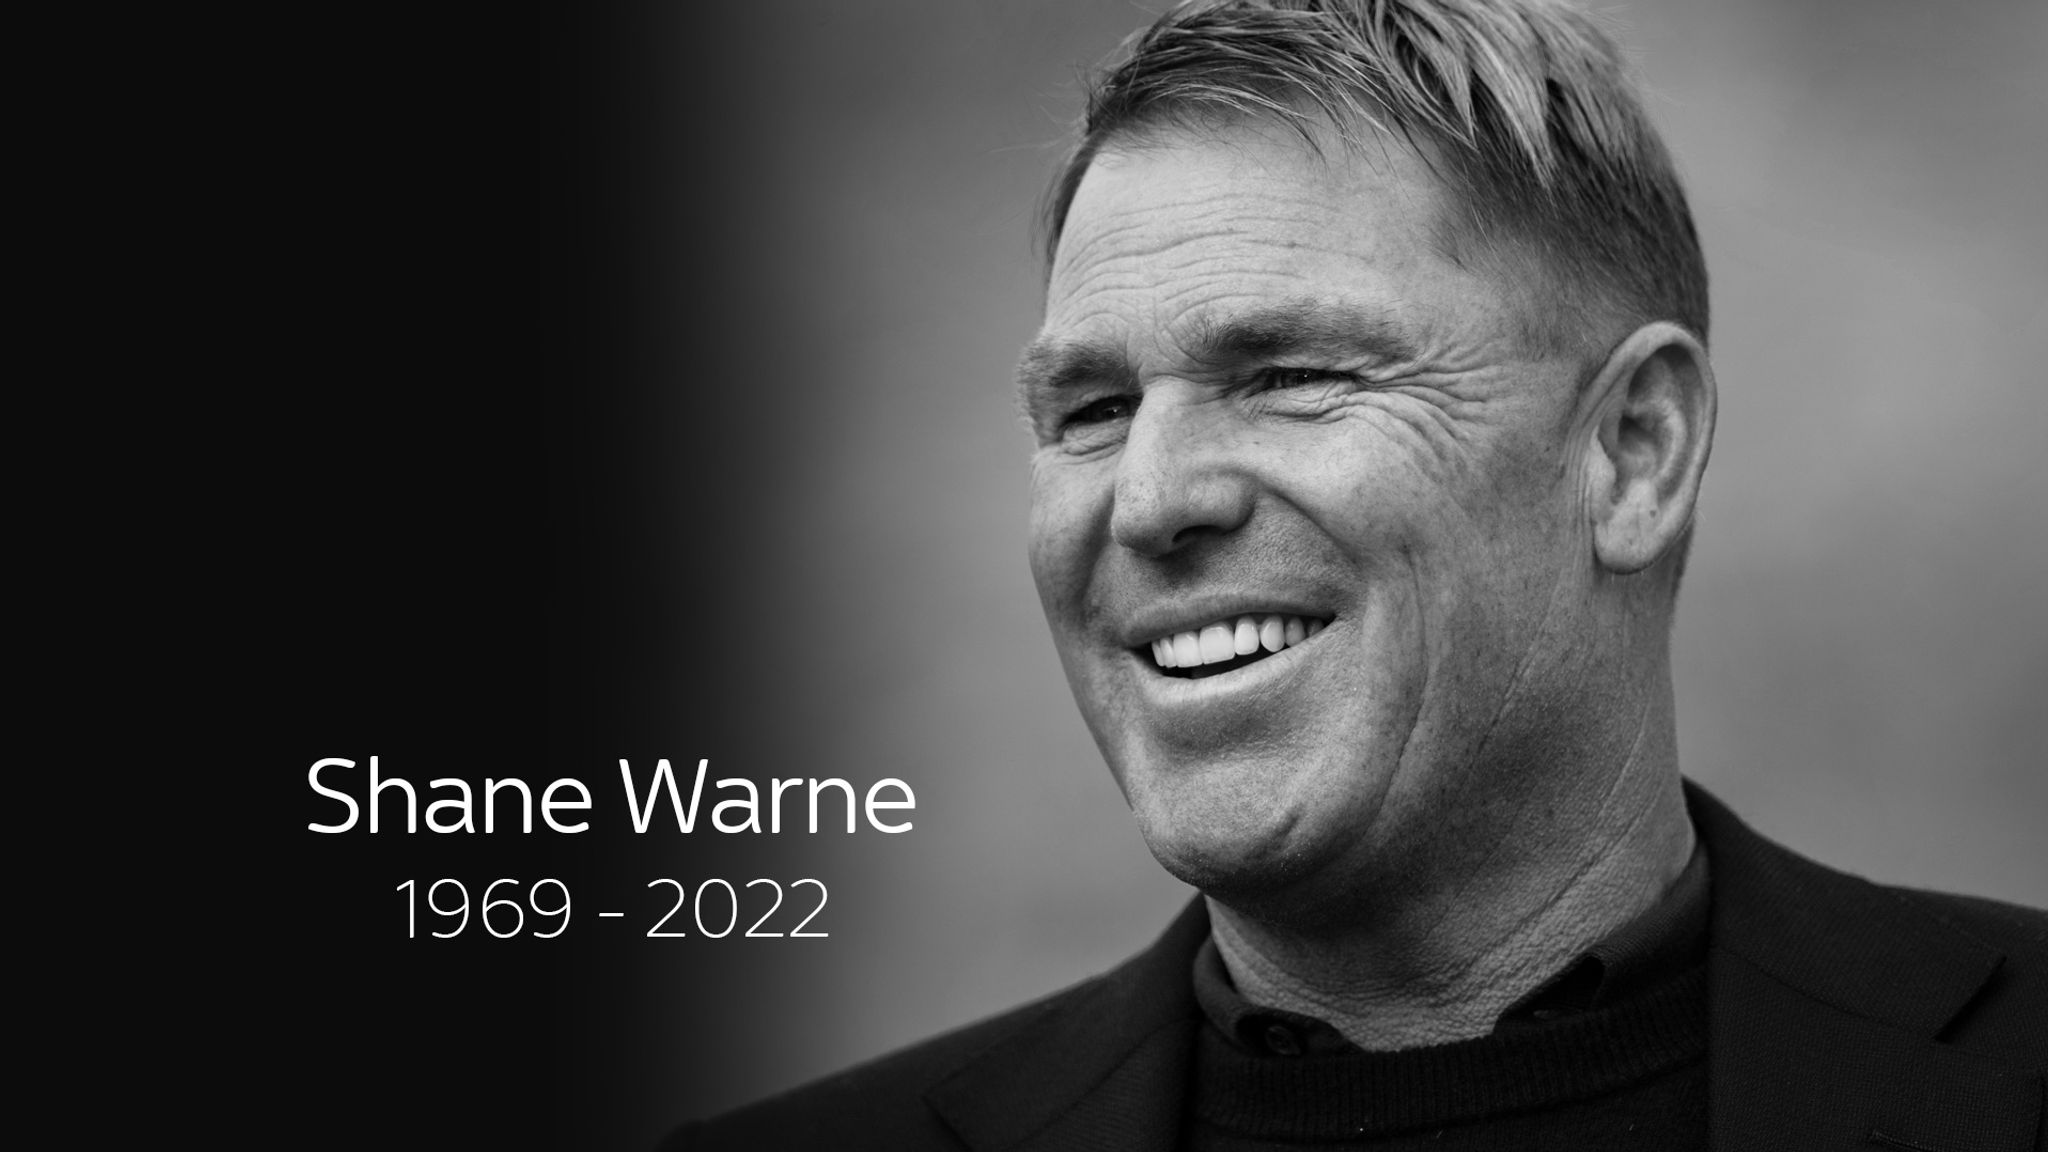 Warne died while vacationing in island of Koh Samui, situated in the Gulf of Thailand | Twitter